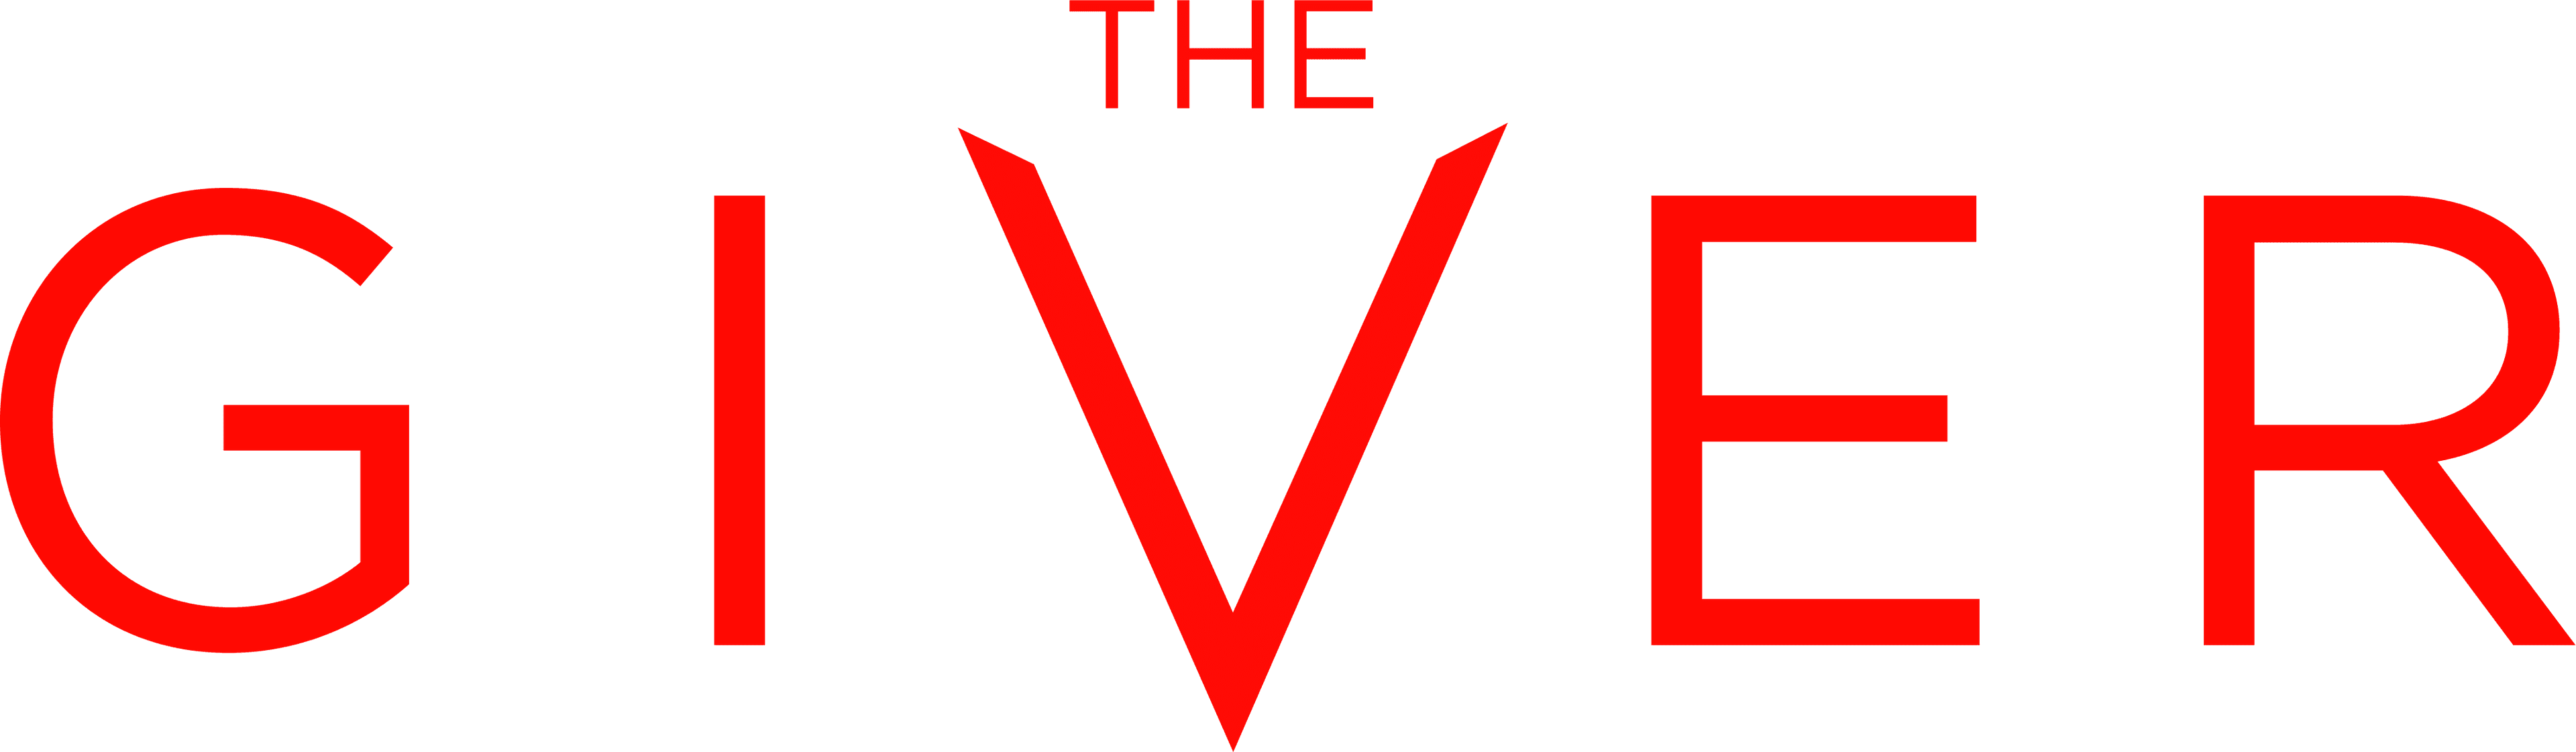 The Giver logo